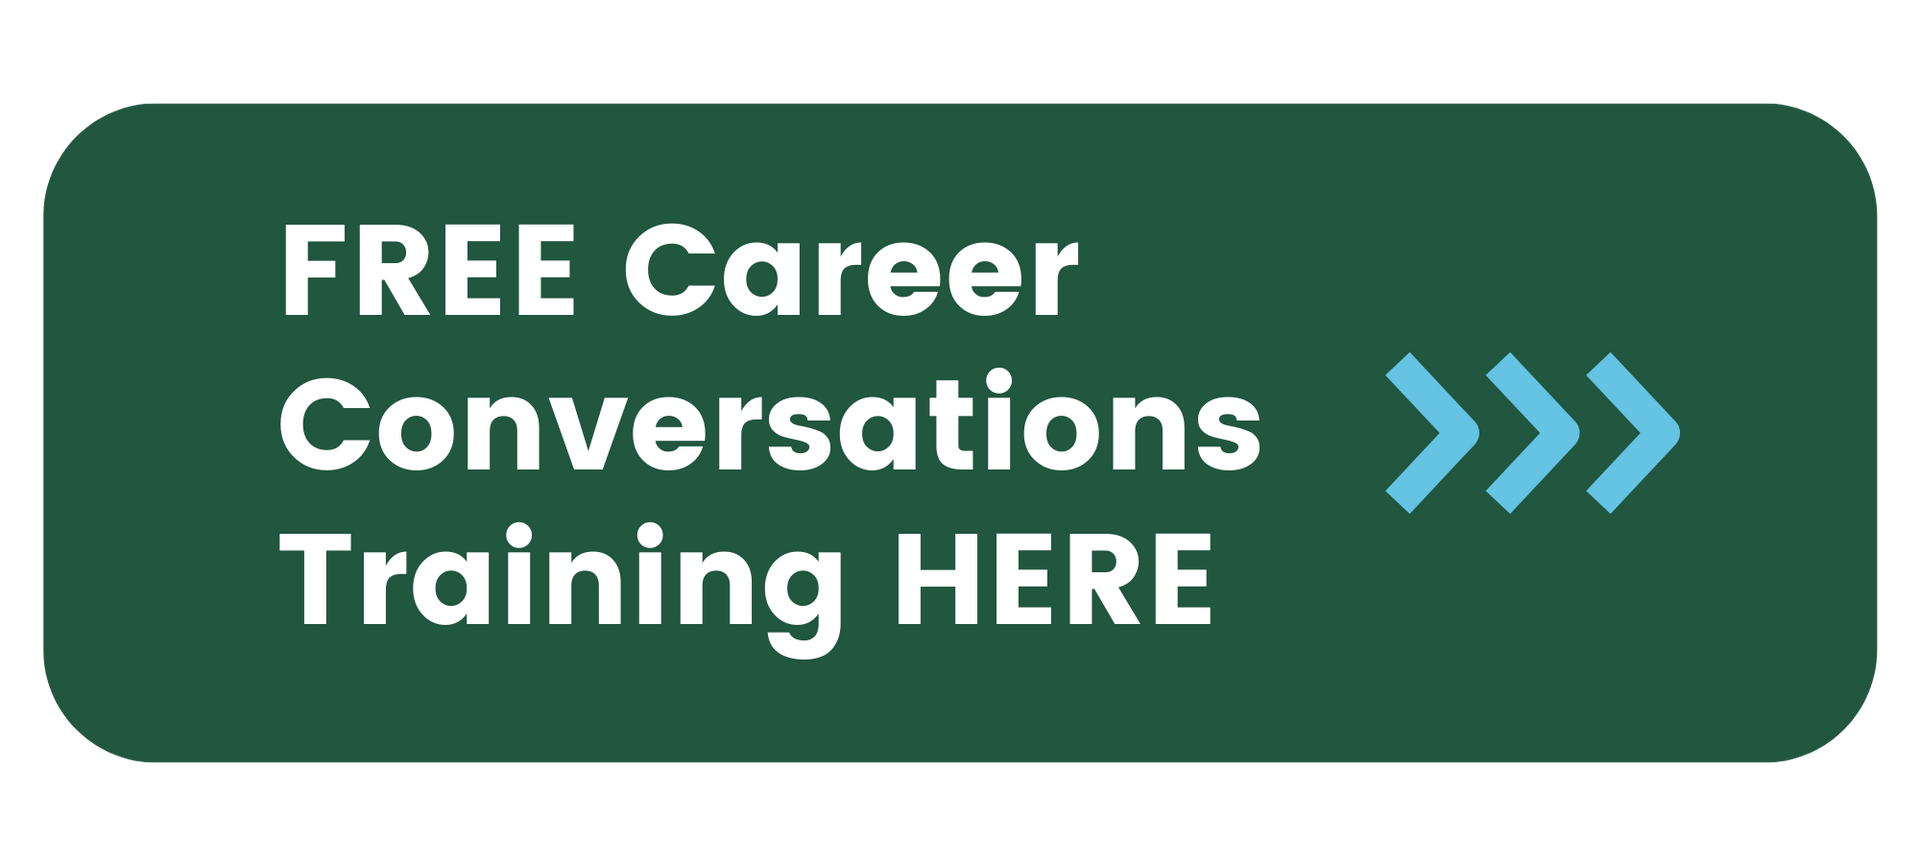 A green button that says `` free career conversations training here ''.